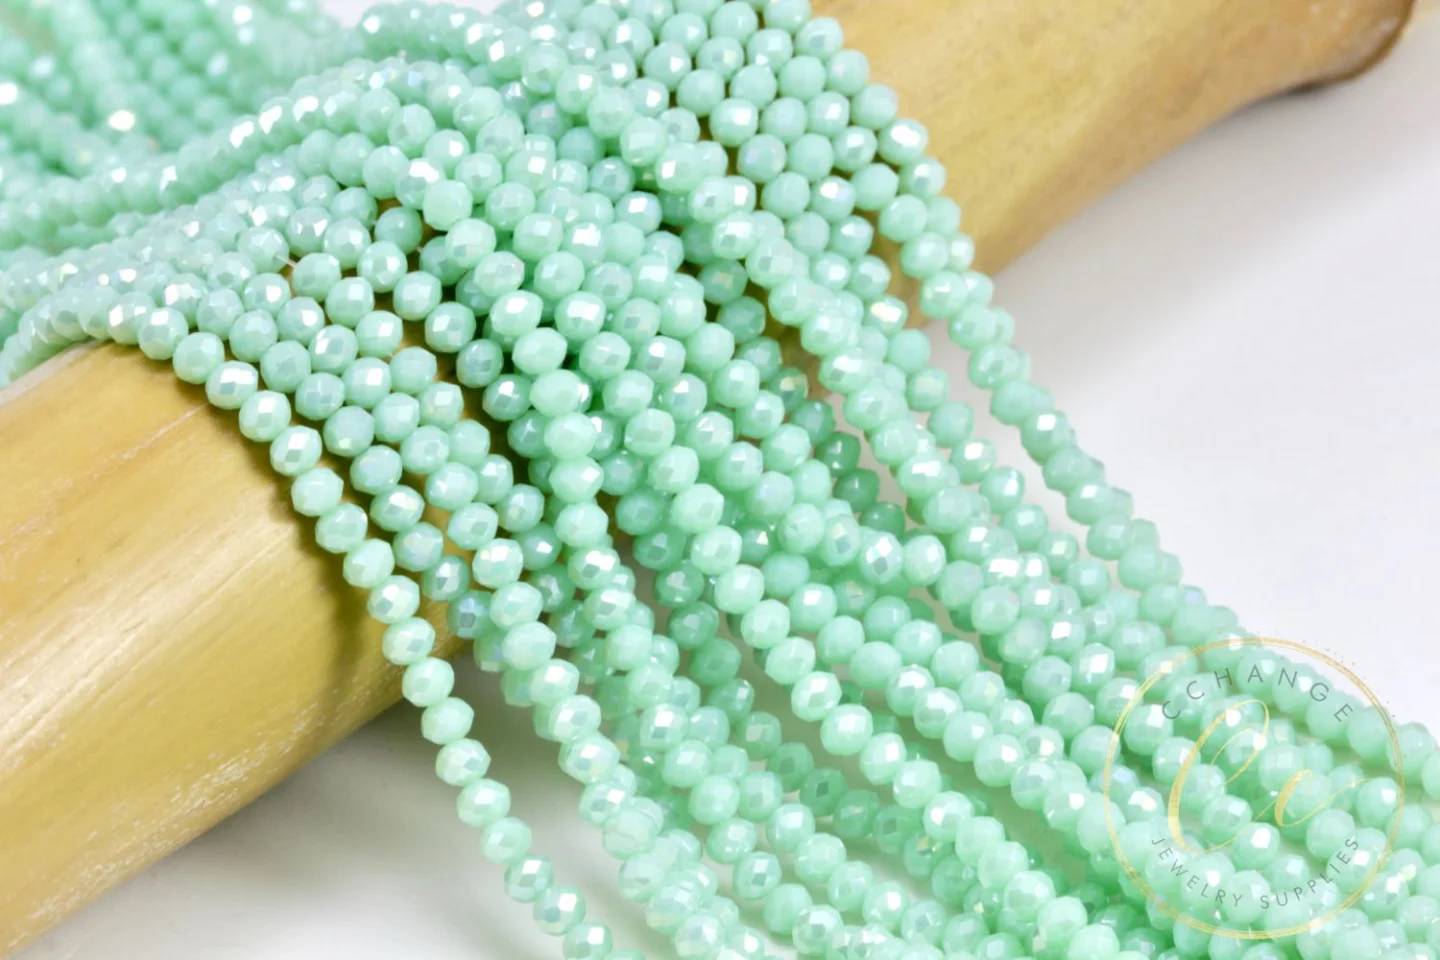 3mm-green-crystal-glass-beads.